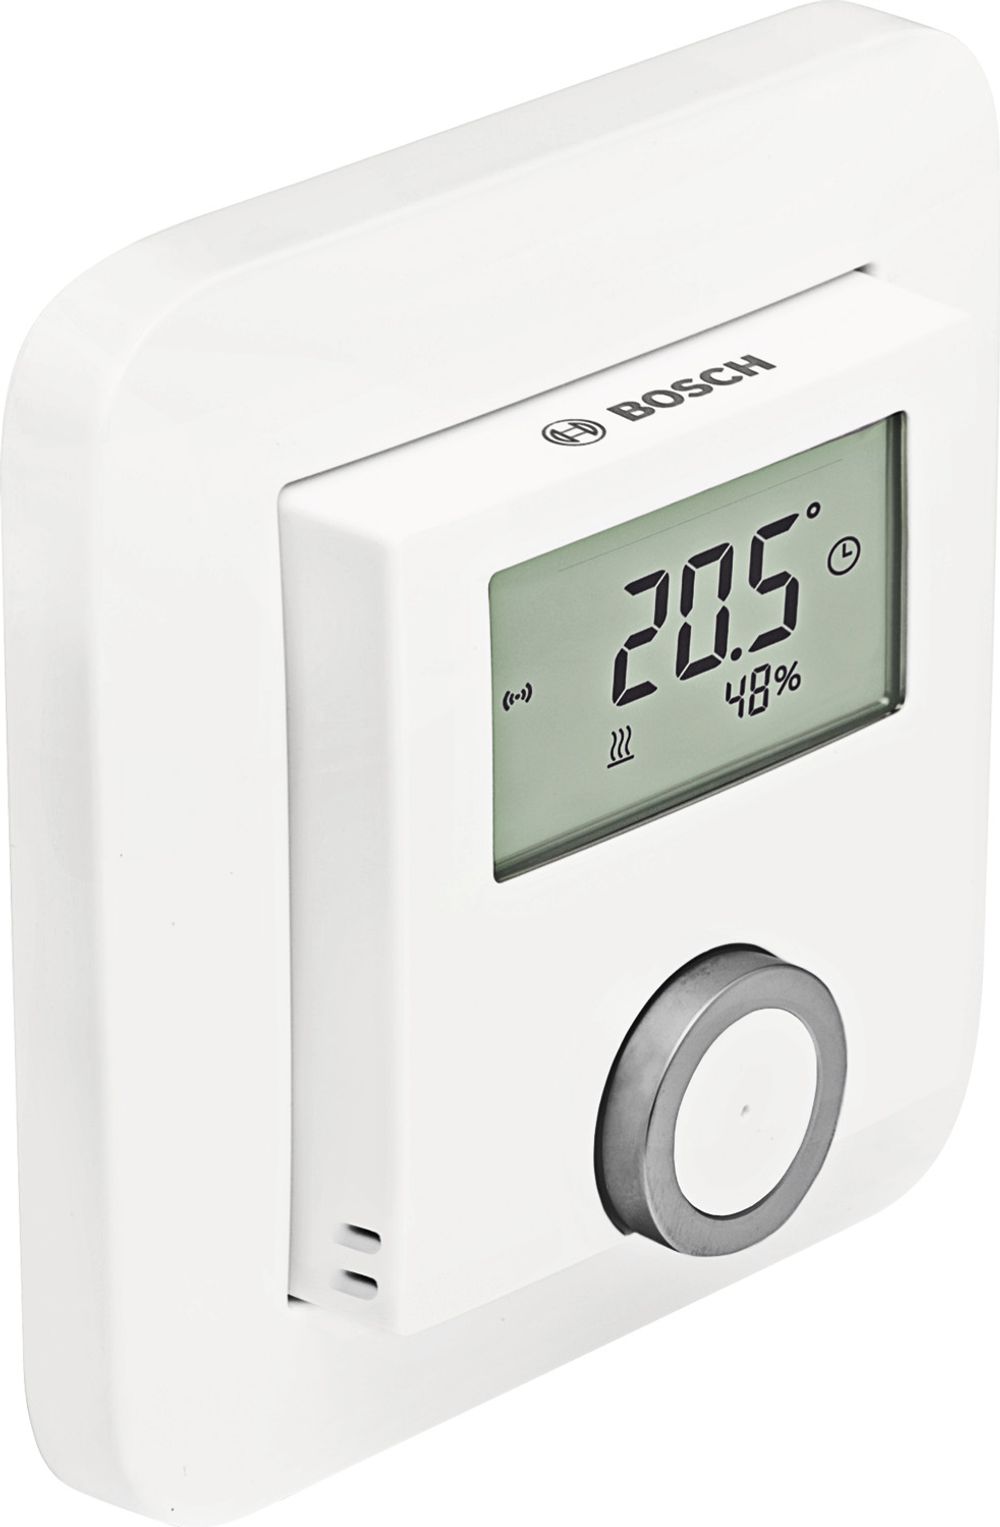 https://raleo.de:443/files/img/11ecb89070849020acdc652d784c8e04/size_l/Bosch-Smart-Home-Raumthermostat-THB-bis-6-HK-Thermostate-oder-Elektroheizung-8750001259 gallery number 1